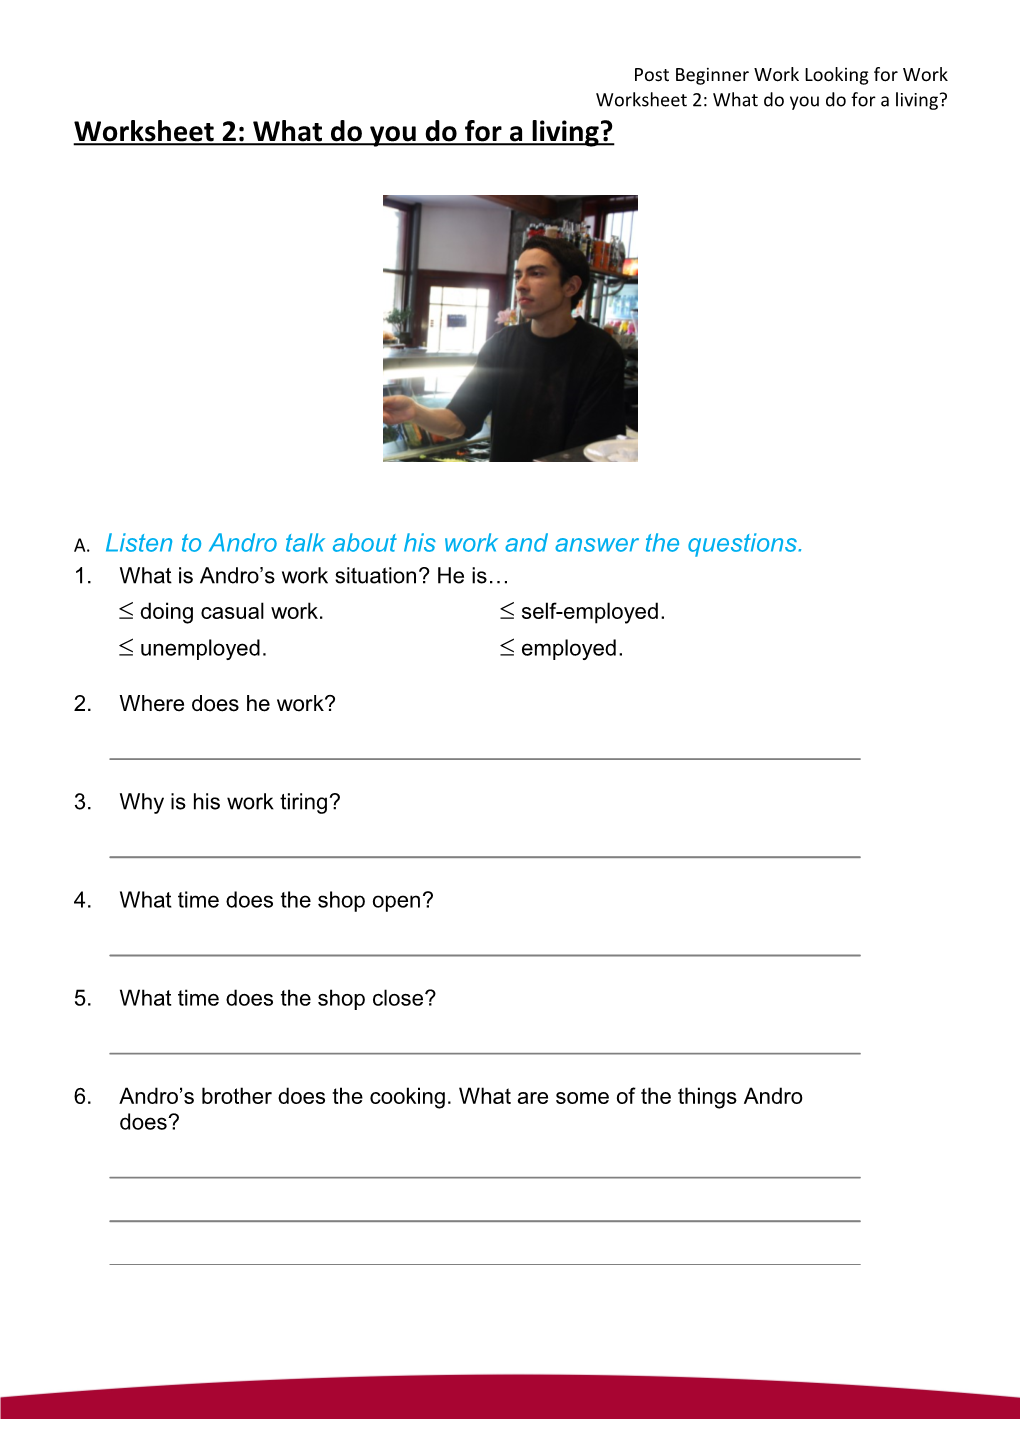 Post Beginner Work Looking for Work Worksheet 2: What Do You Do for a Living?